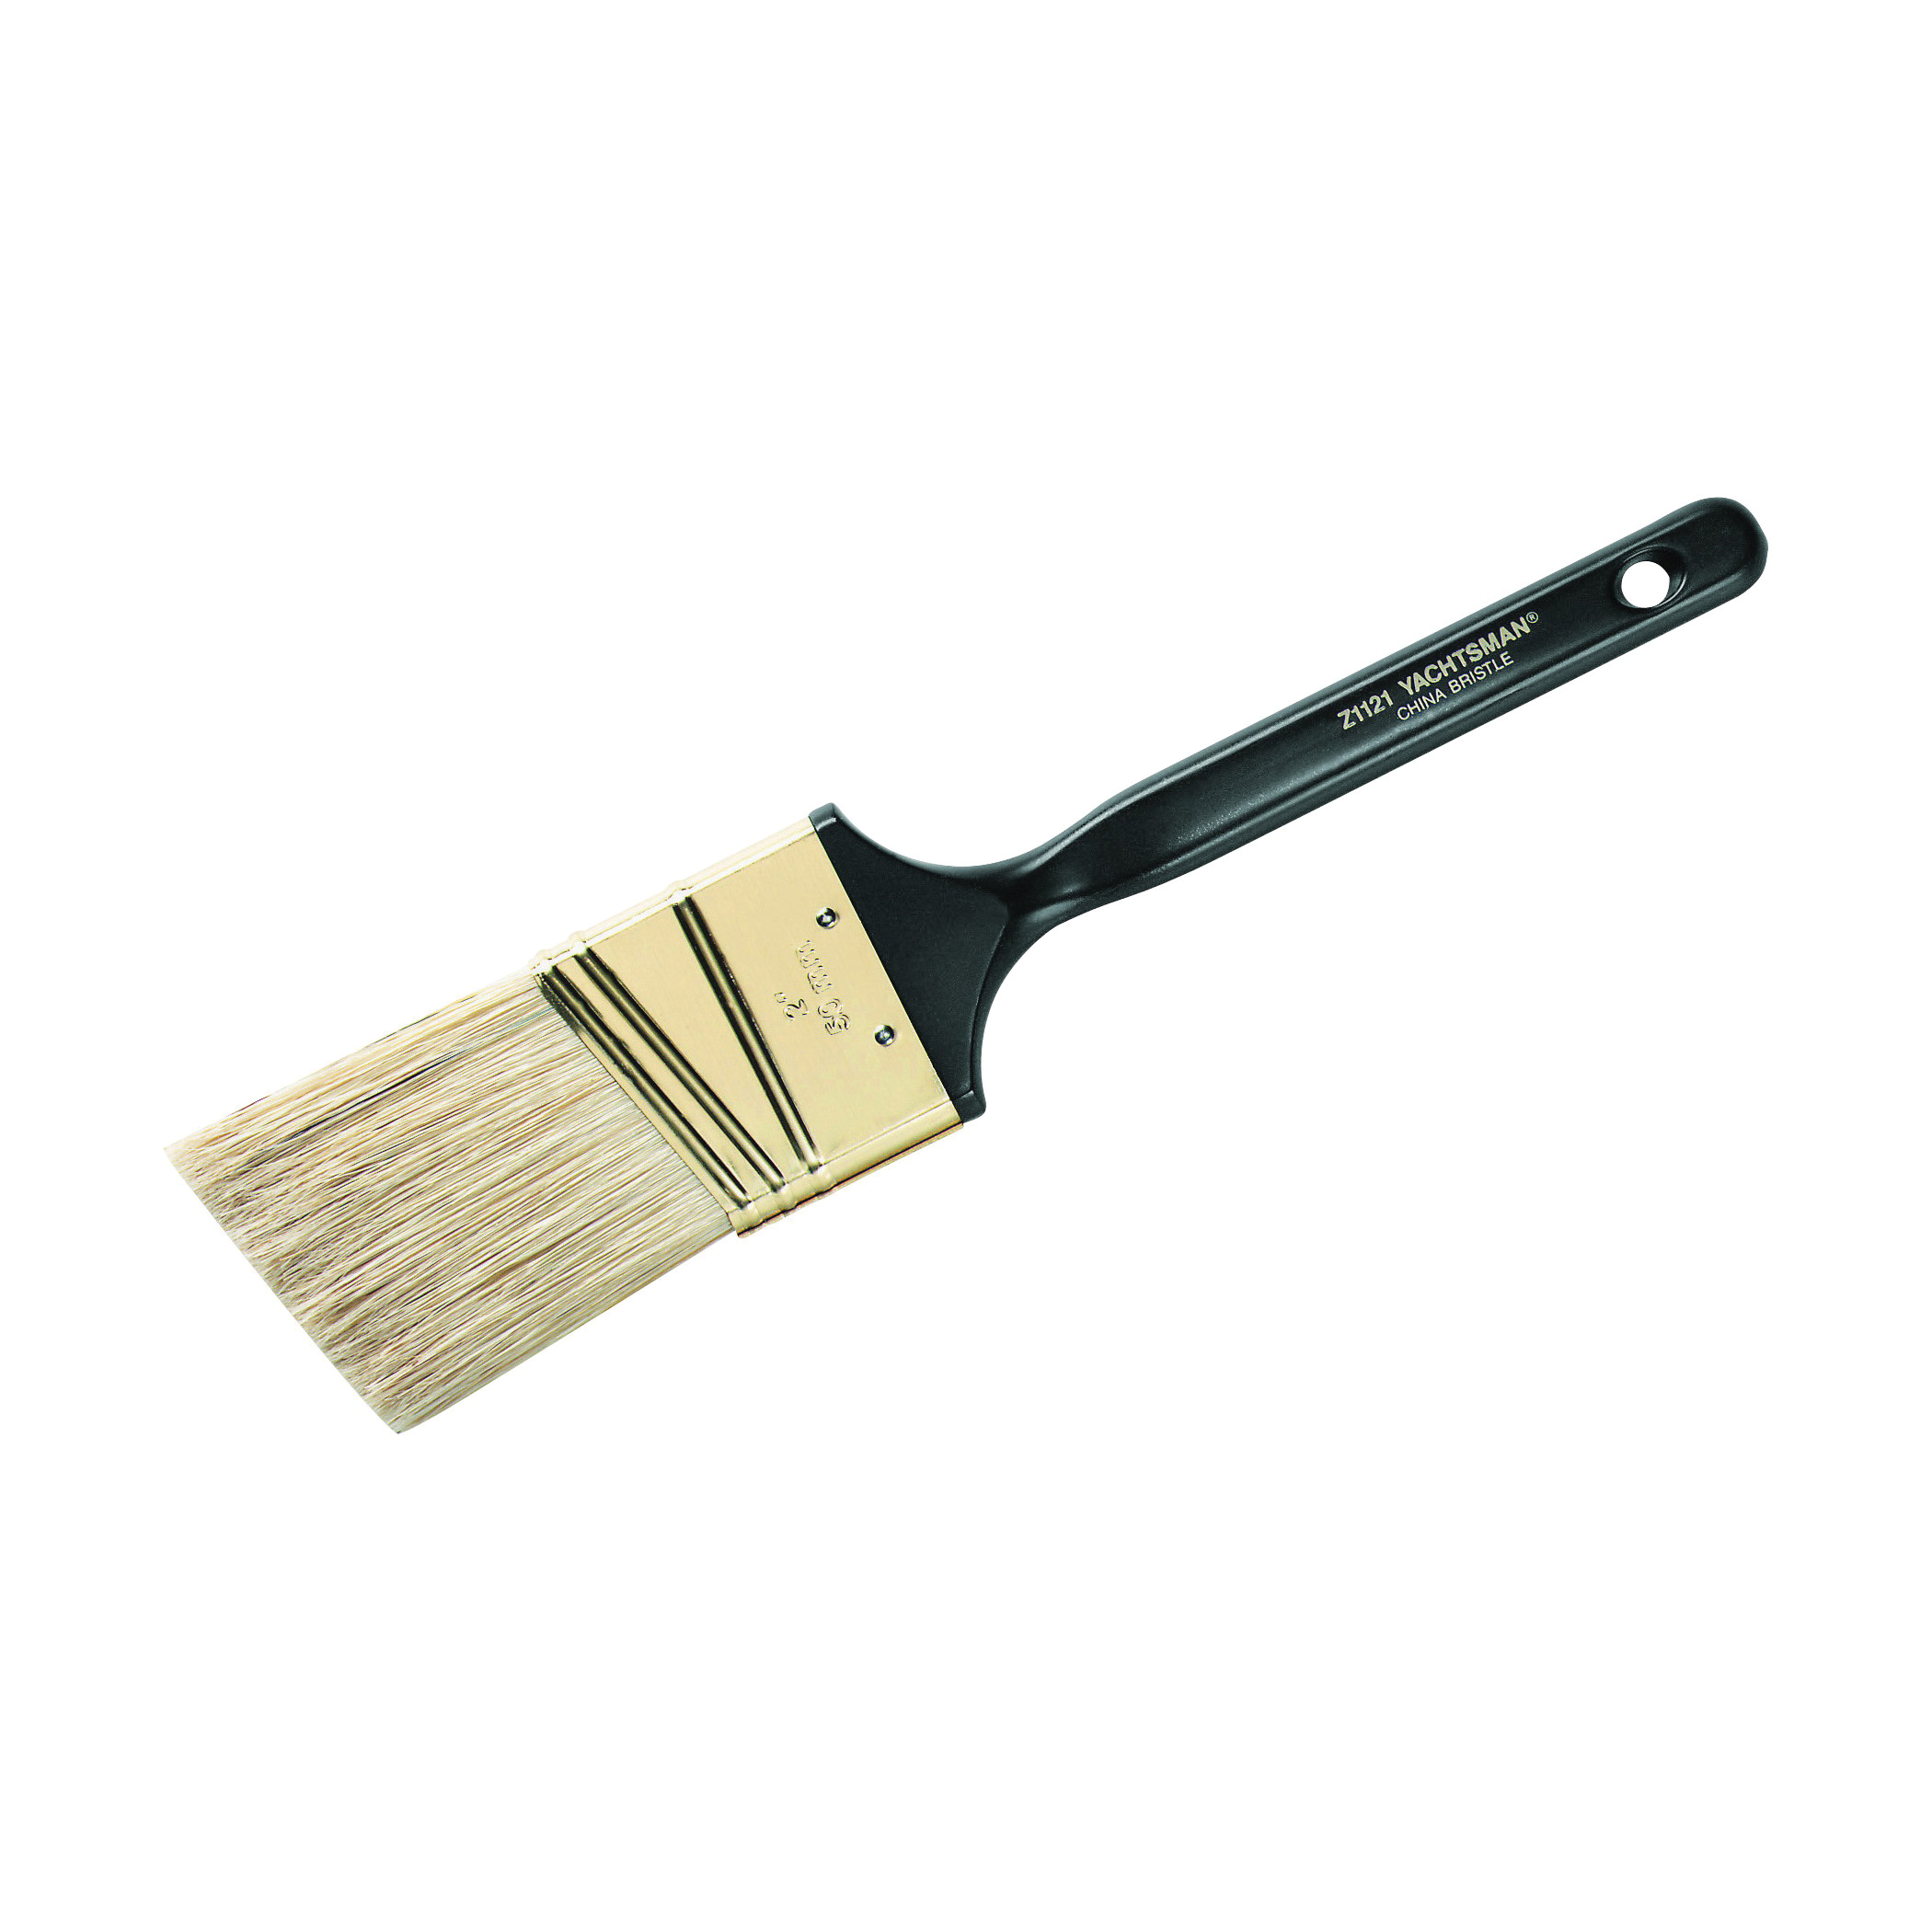 Wooster Z1121-2-1/2 Paint Brush, 2-1/2 in W, 2-11/16 in L Bristle, China Bristle, Sash Handle